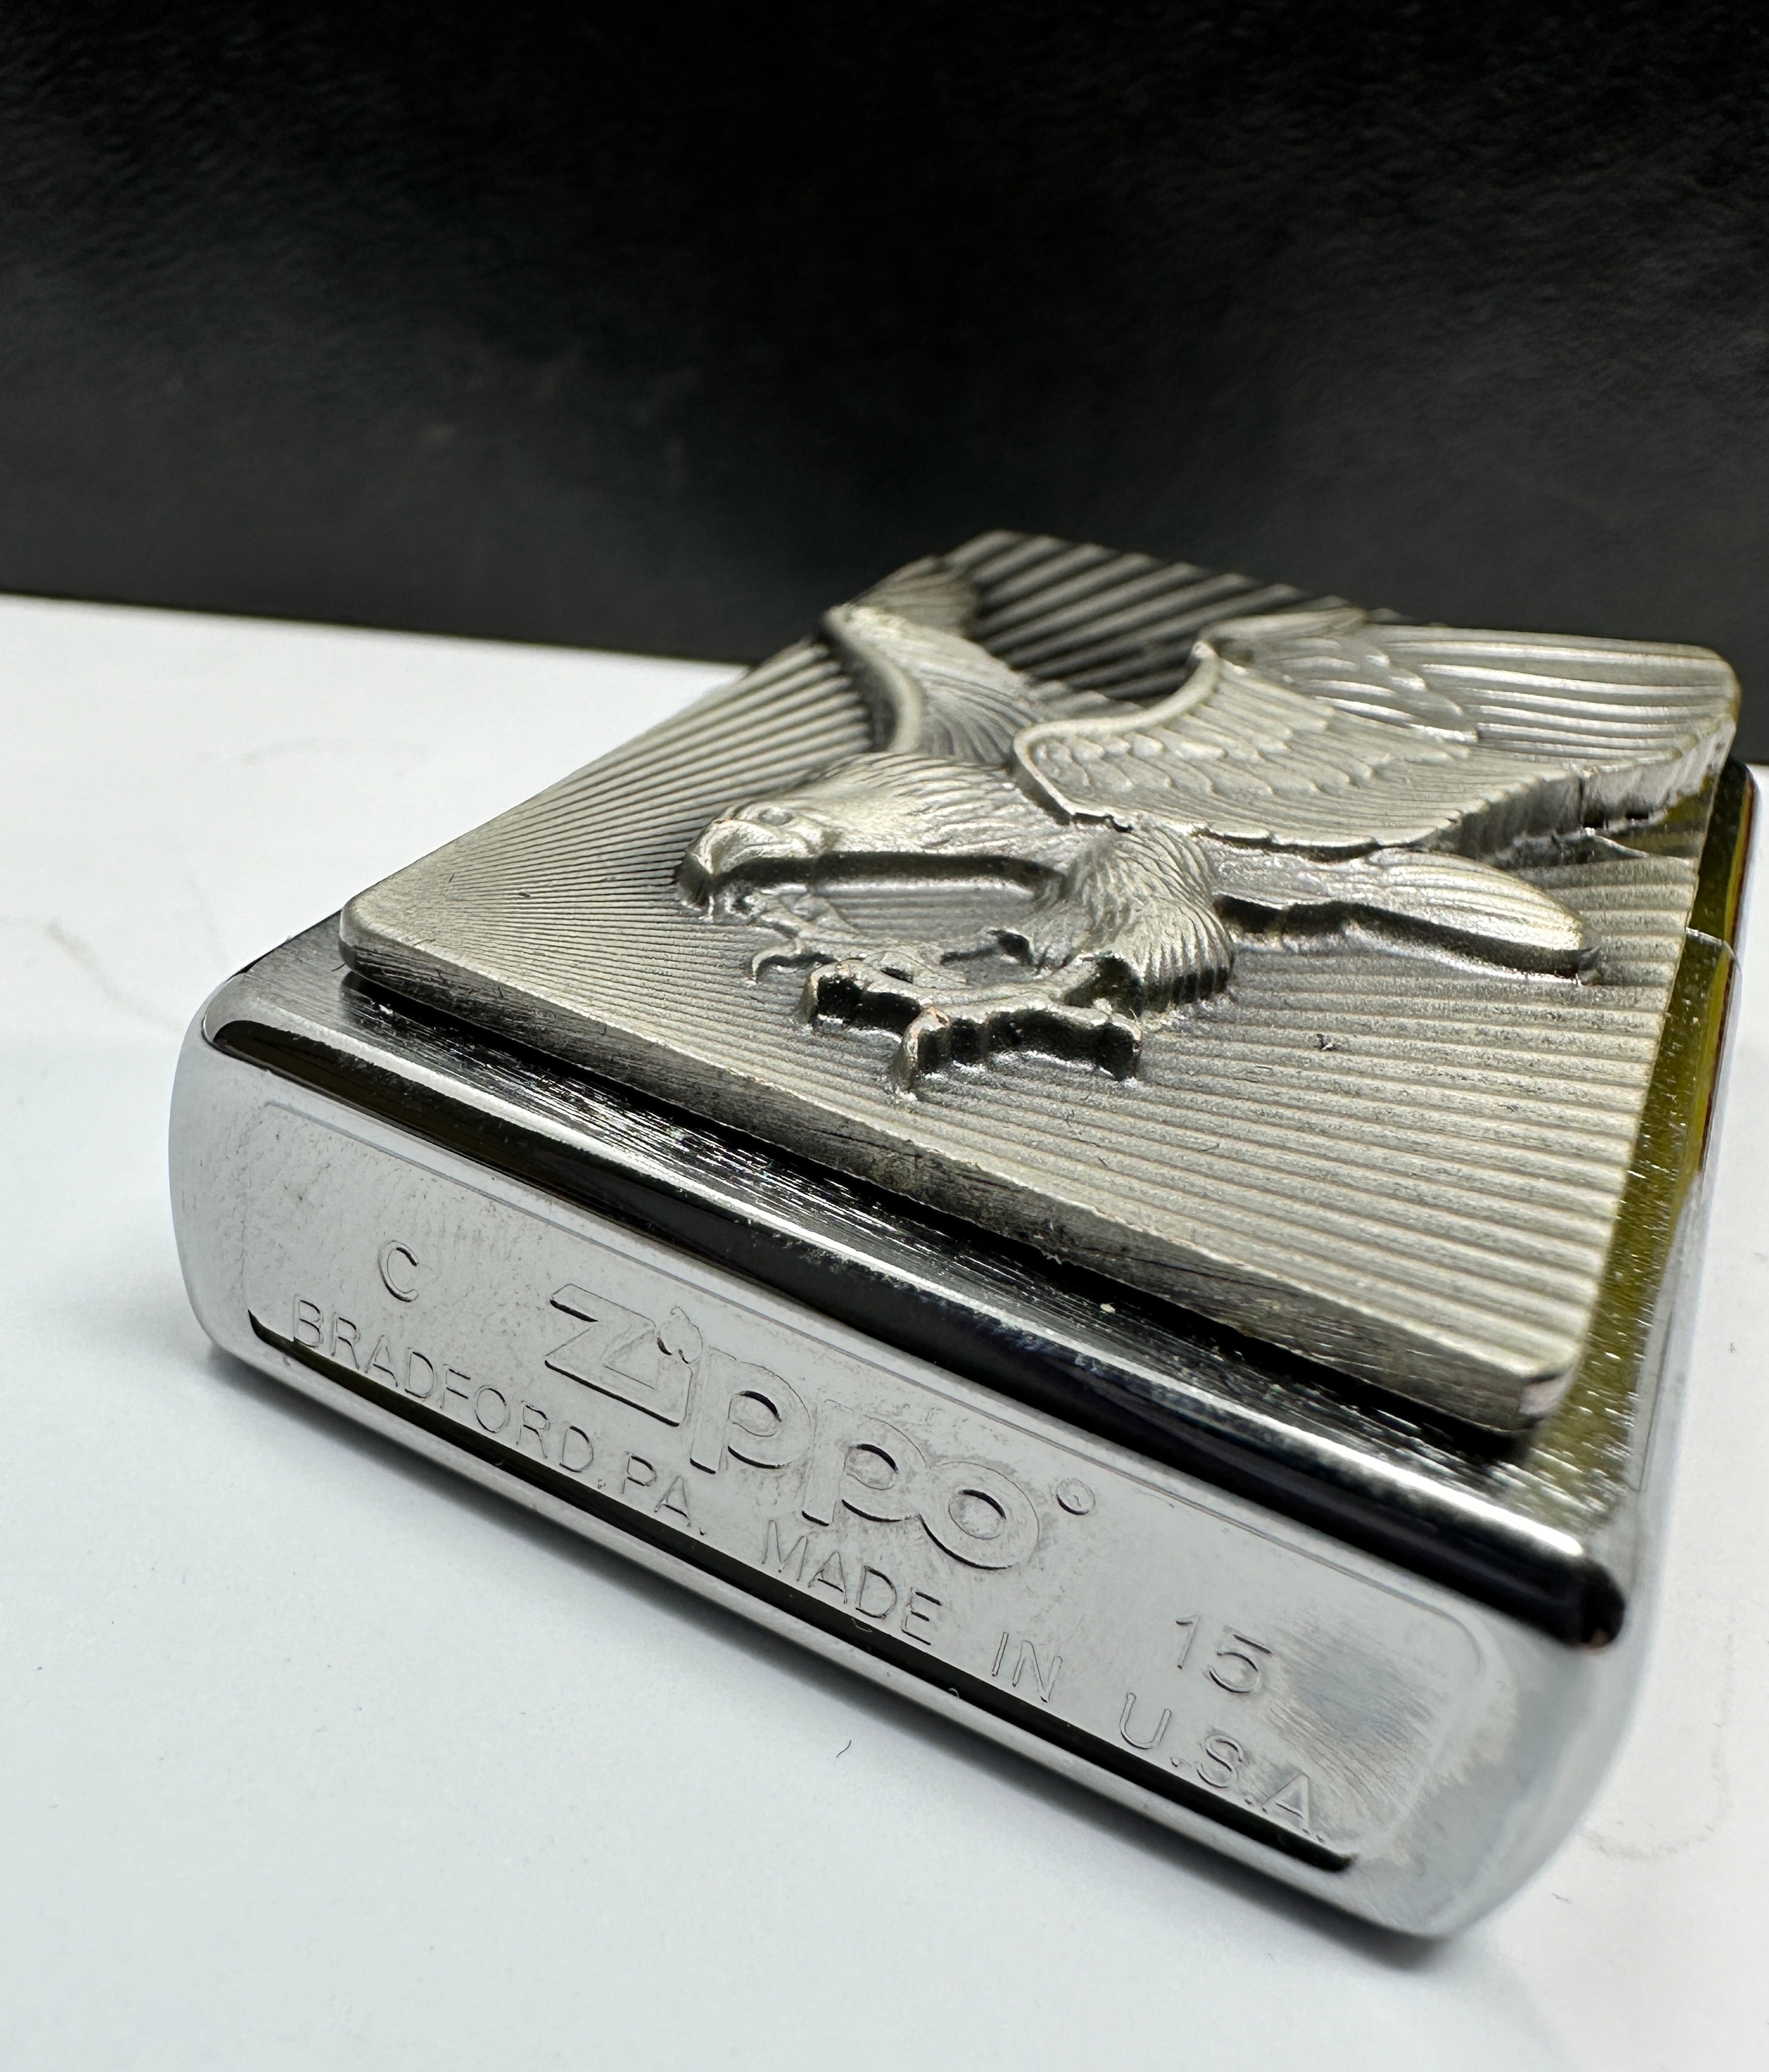 Boxed Zippo lighter - Image 5 of 5